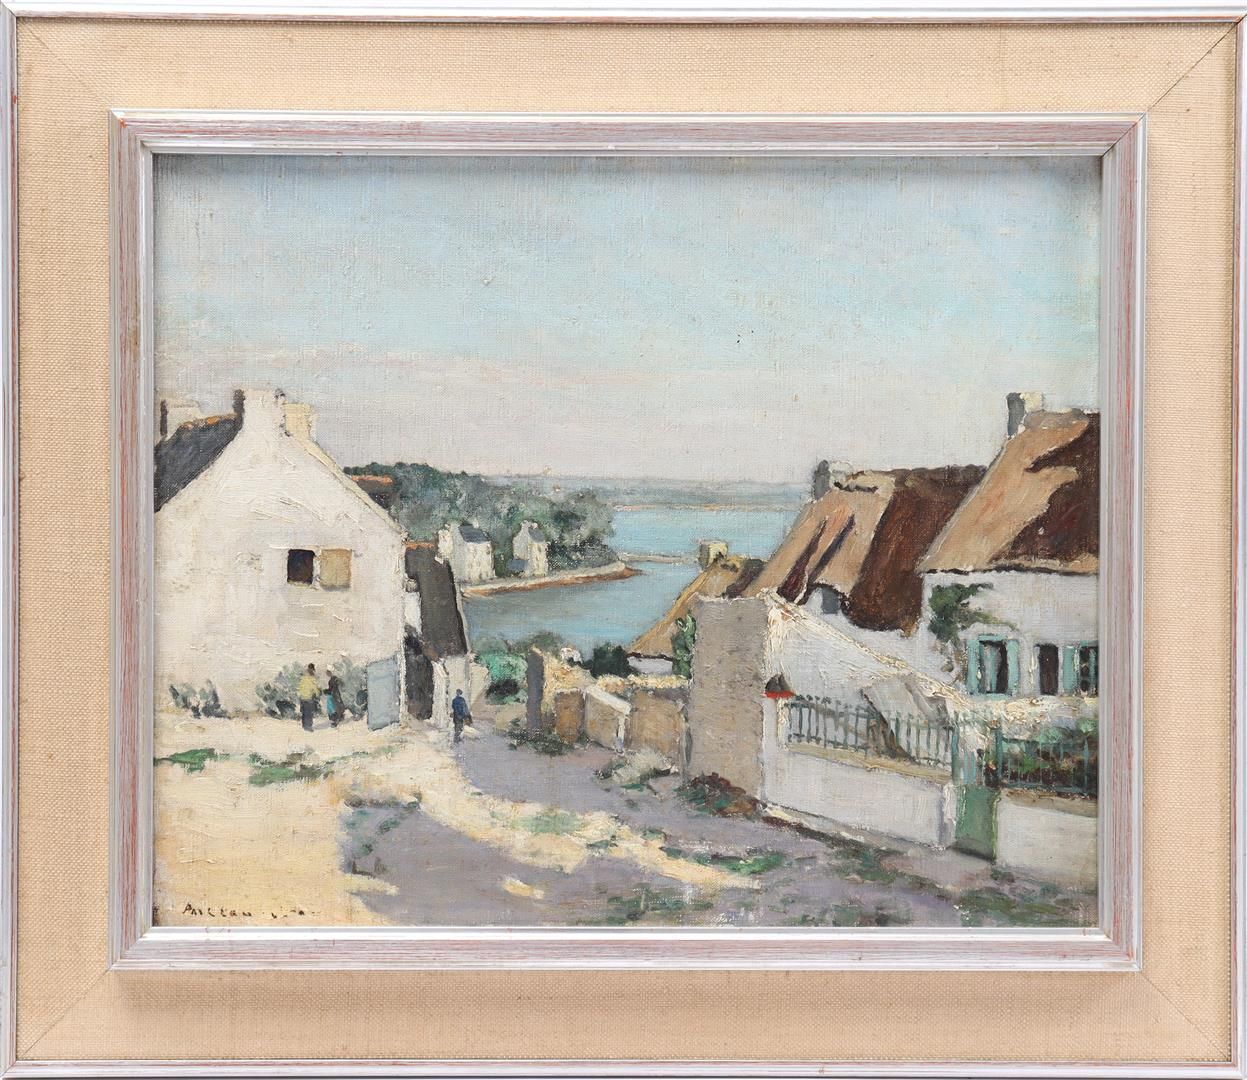 Henri PAILLER Henri Pailler (1876-1954)

View of the fishing village of Brittany&hellip;